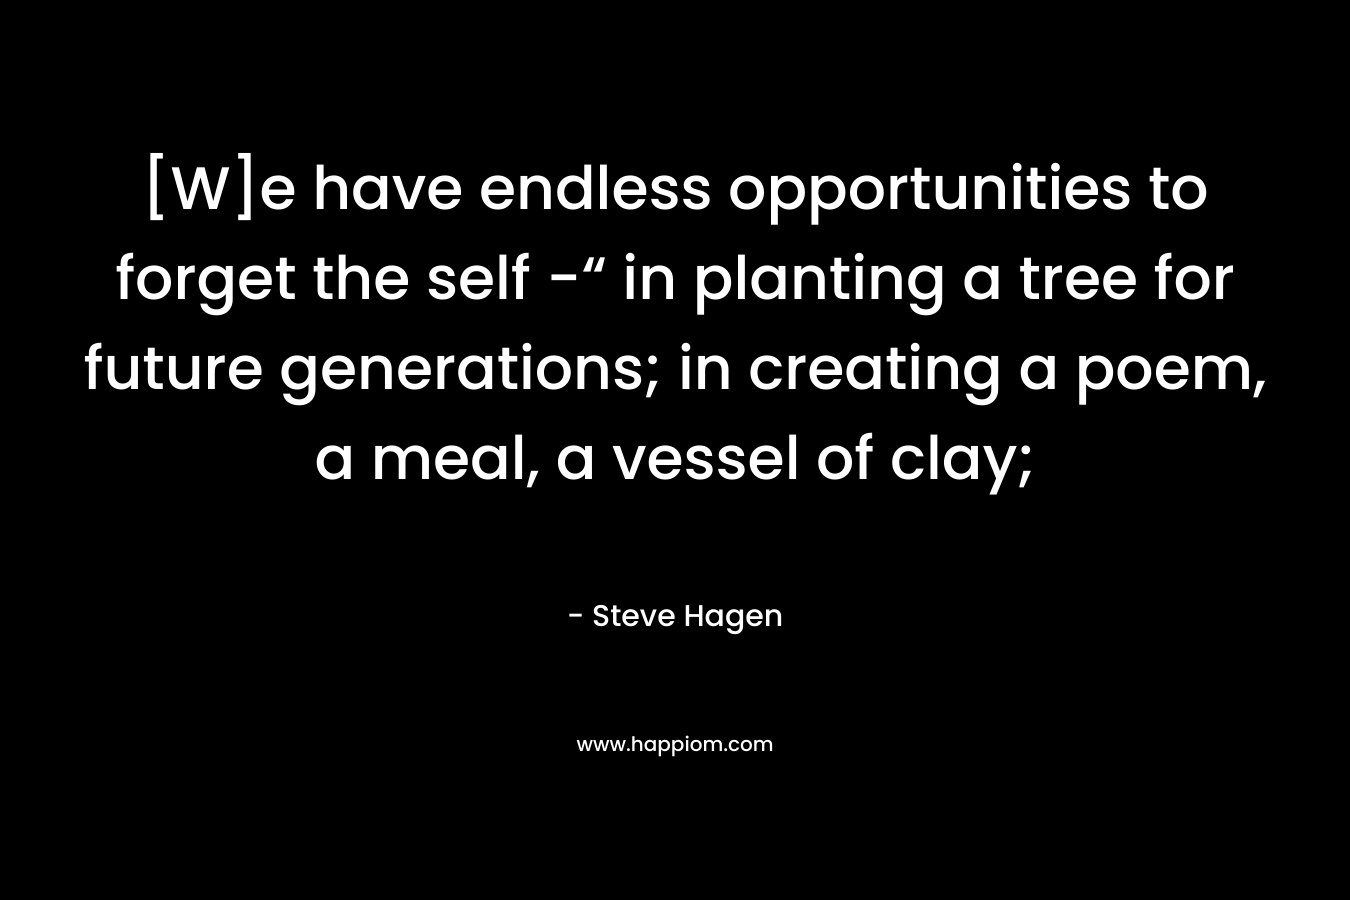 [W]e have endless opportunities to forget the self -“ in planting a tree for future generations; in creating a poem, a meal, a vessel of clay; – Steve Hagen